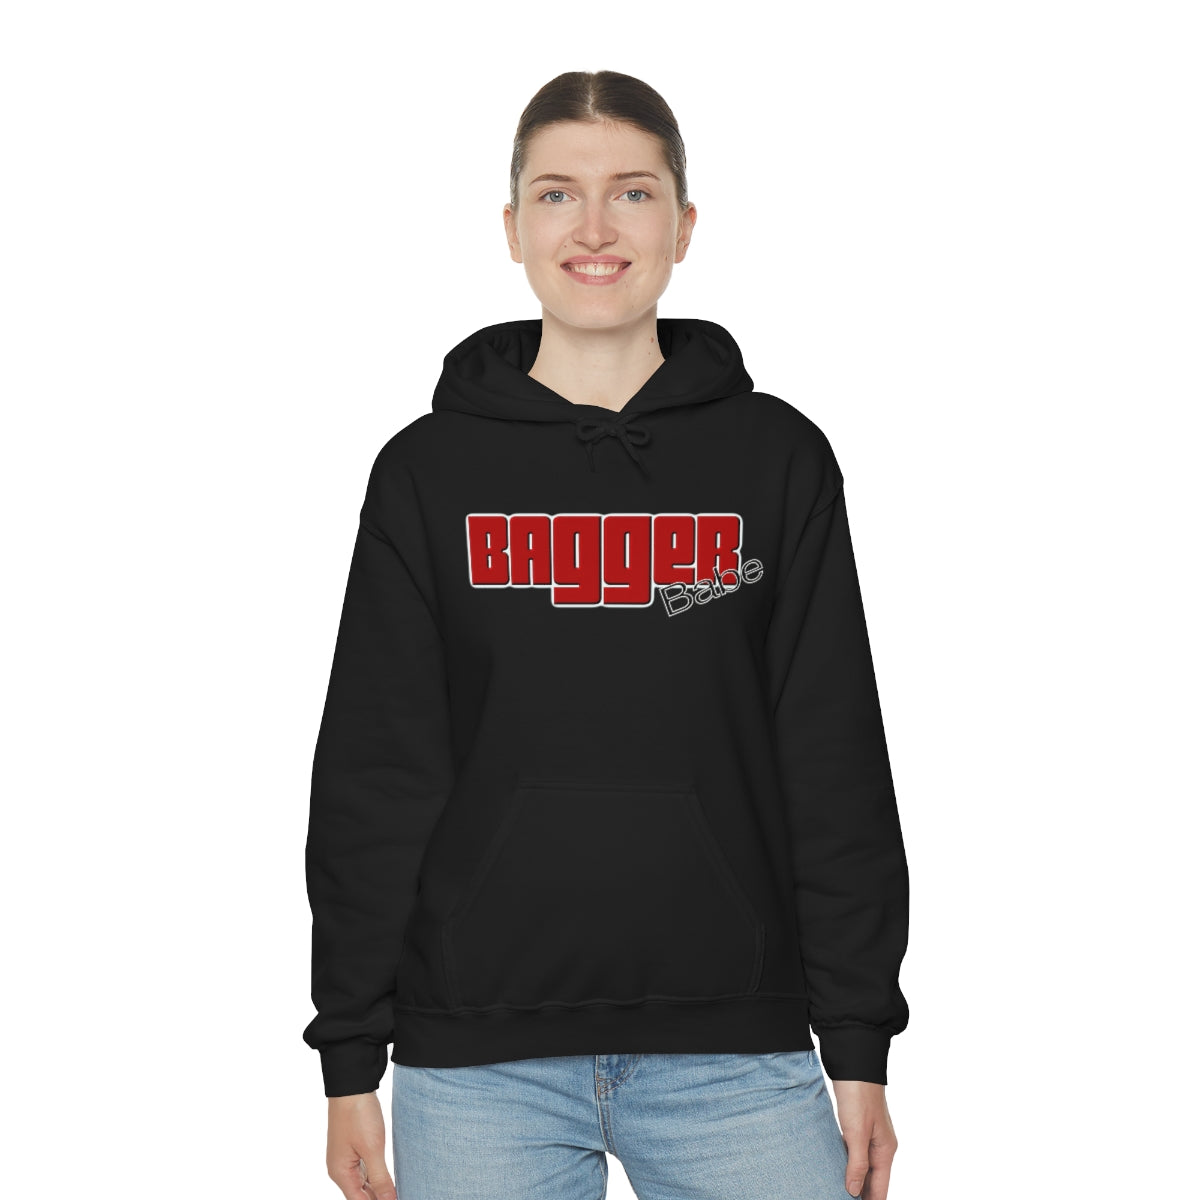 Bagger Babe (Red Letters) Unisex Heavy Blend™ Hooded Sweatshirt